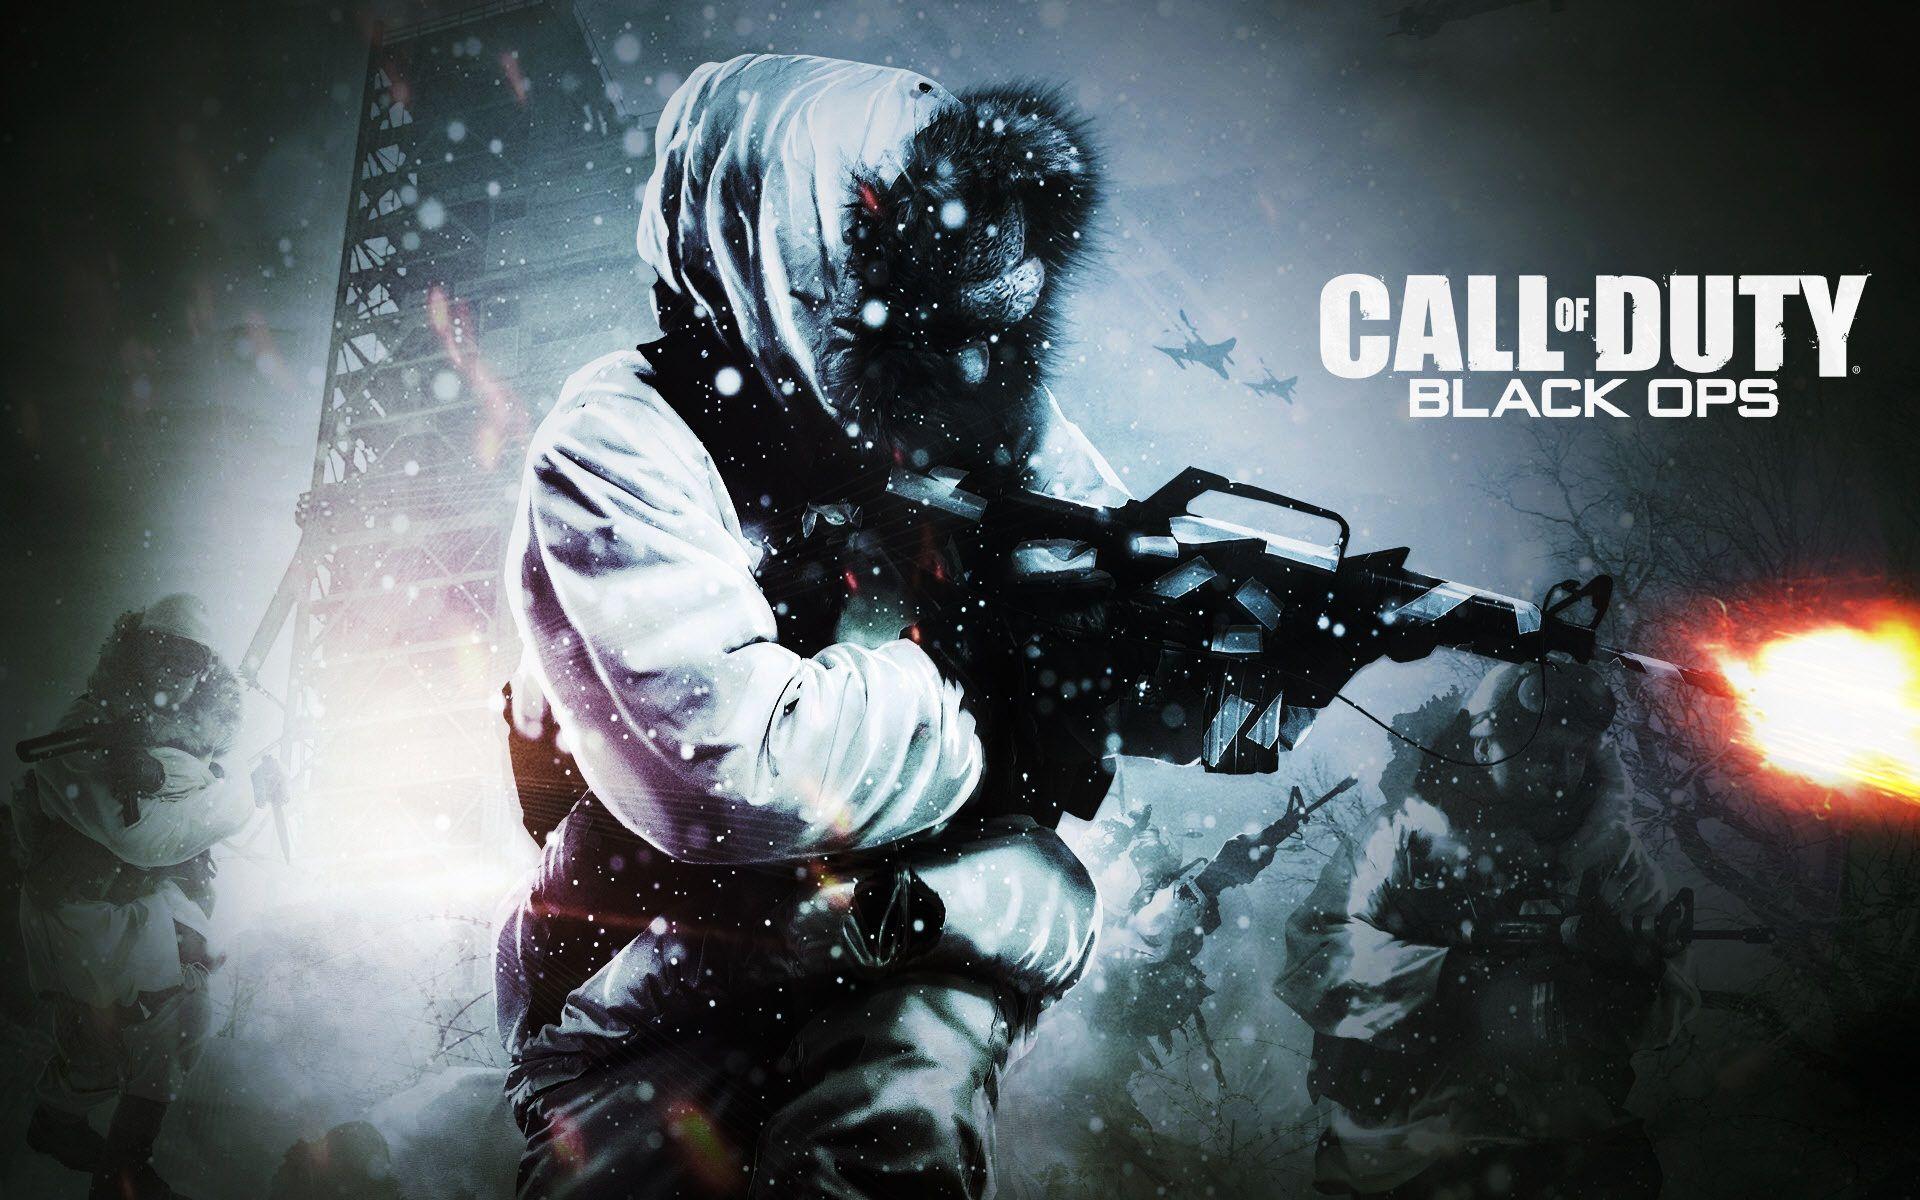 Call of Duy Black Ops 2010 Wallpaper